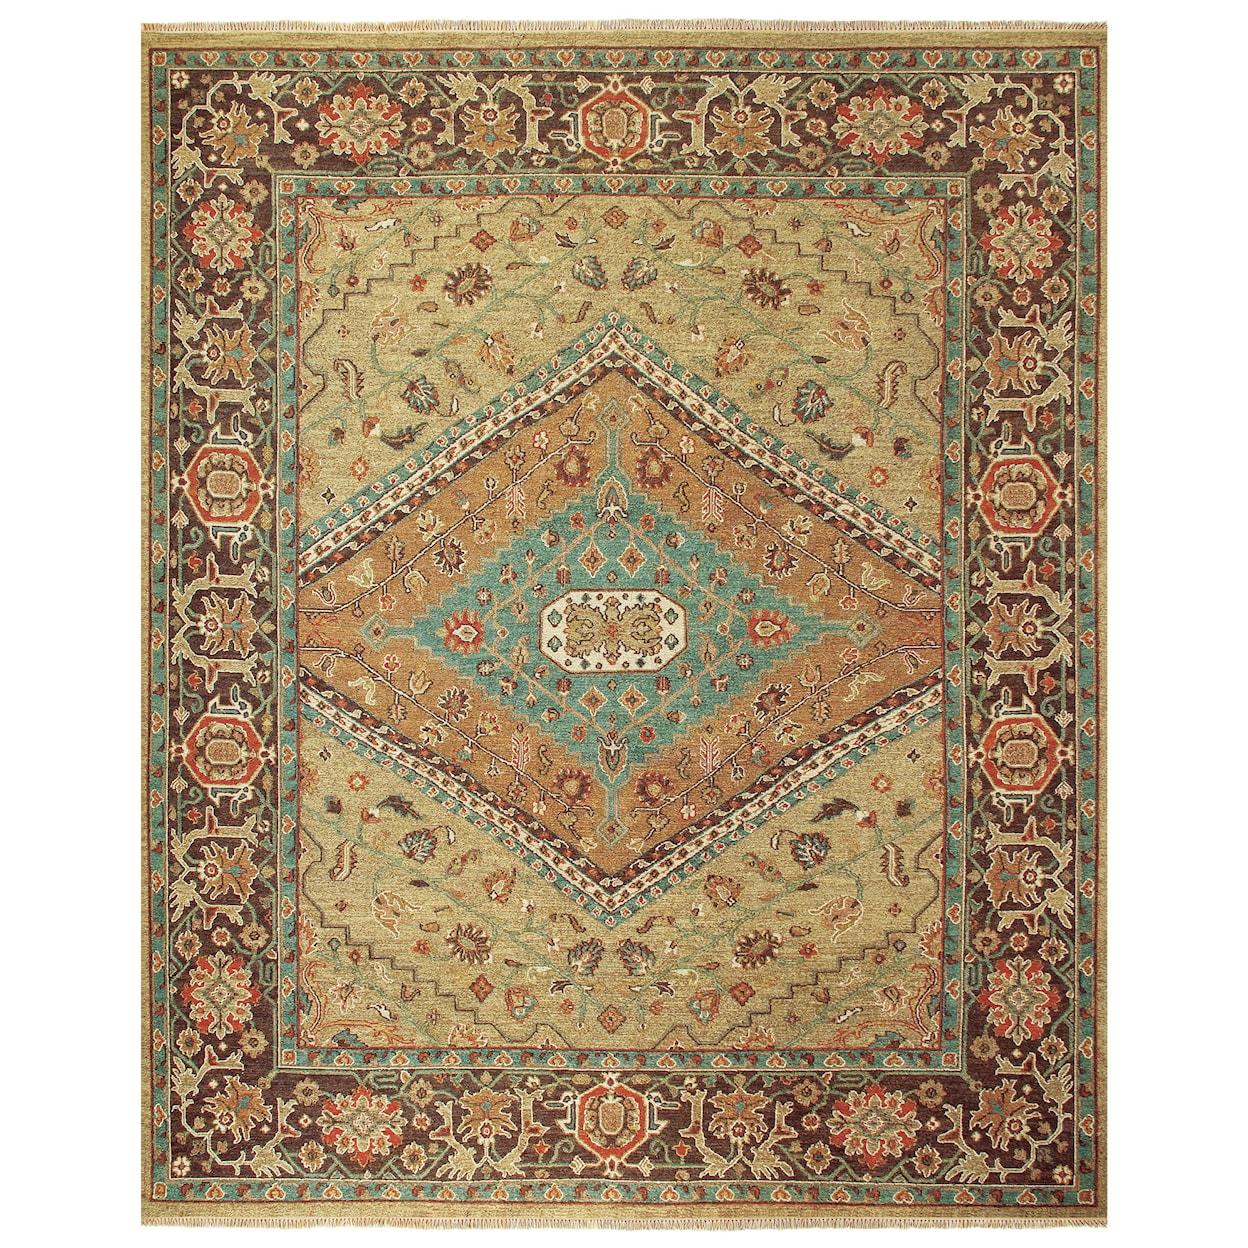 Feizy Rugs Goshen Gold/Brown 9'-6" x 13'-6" Area Rug